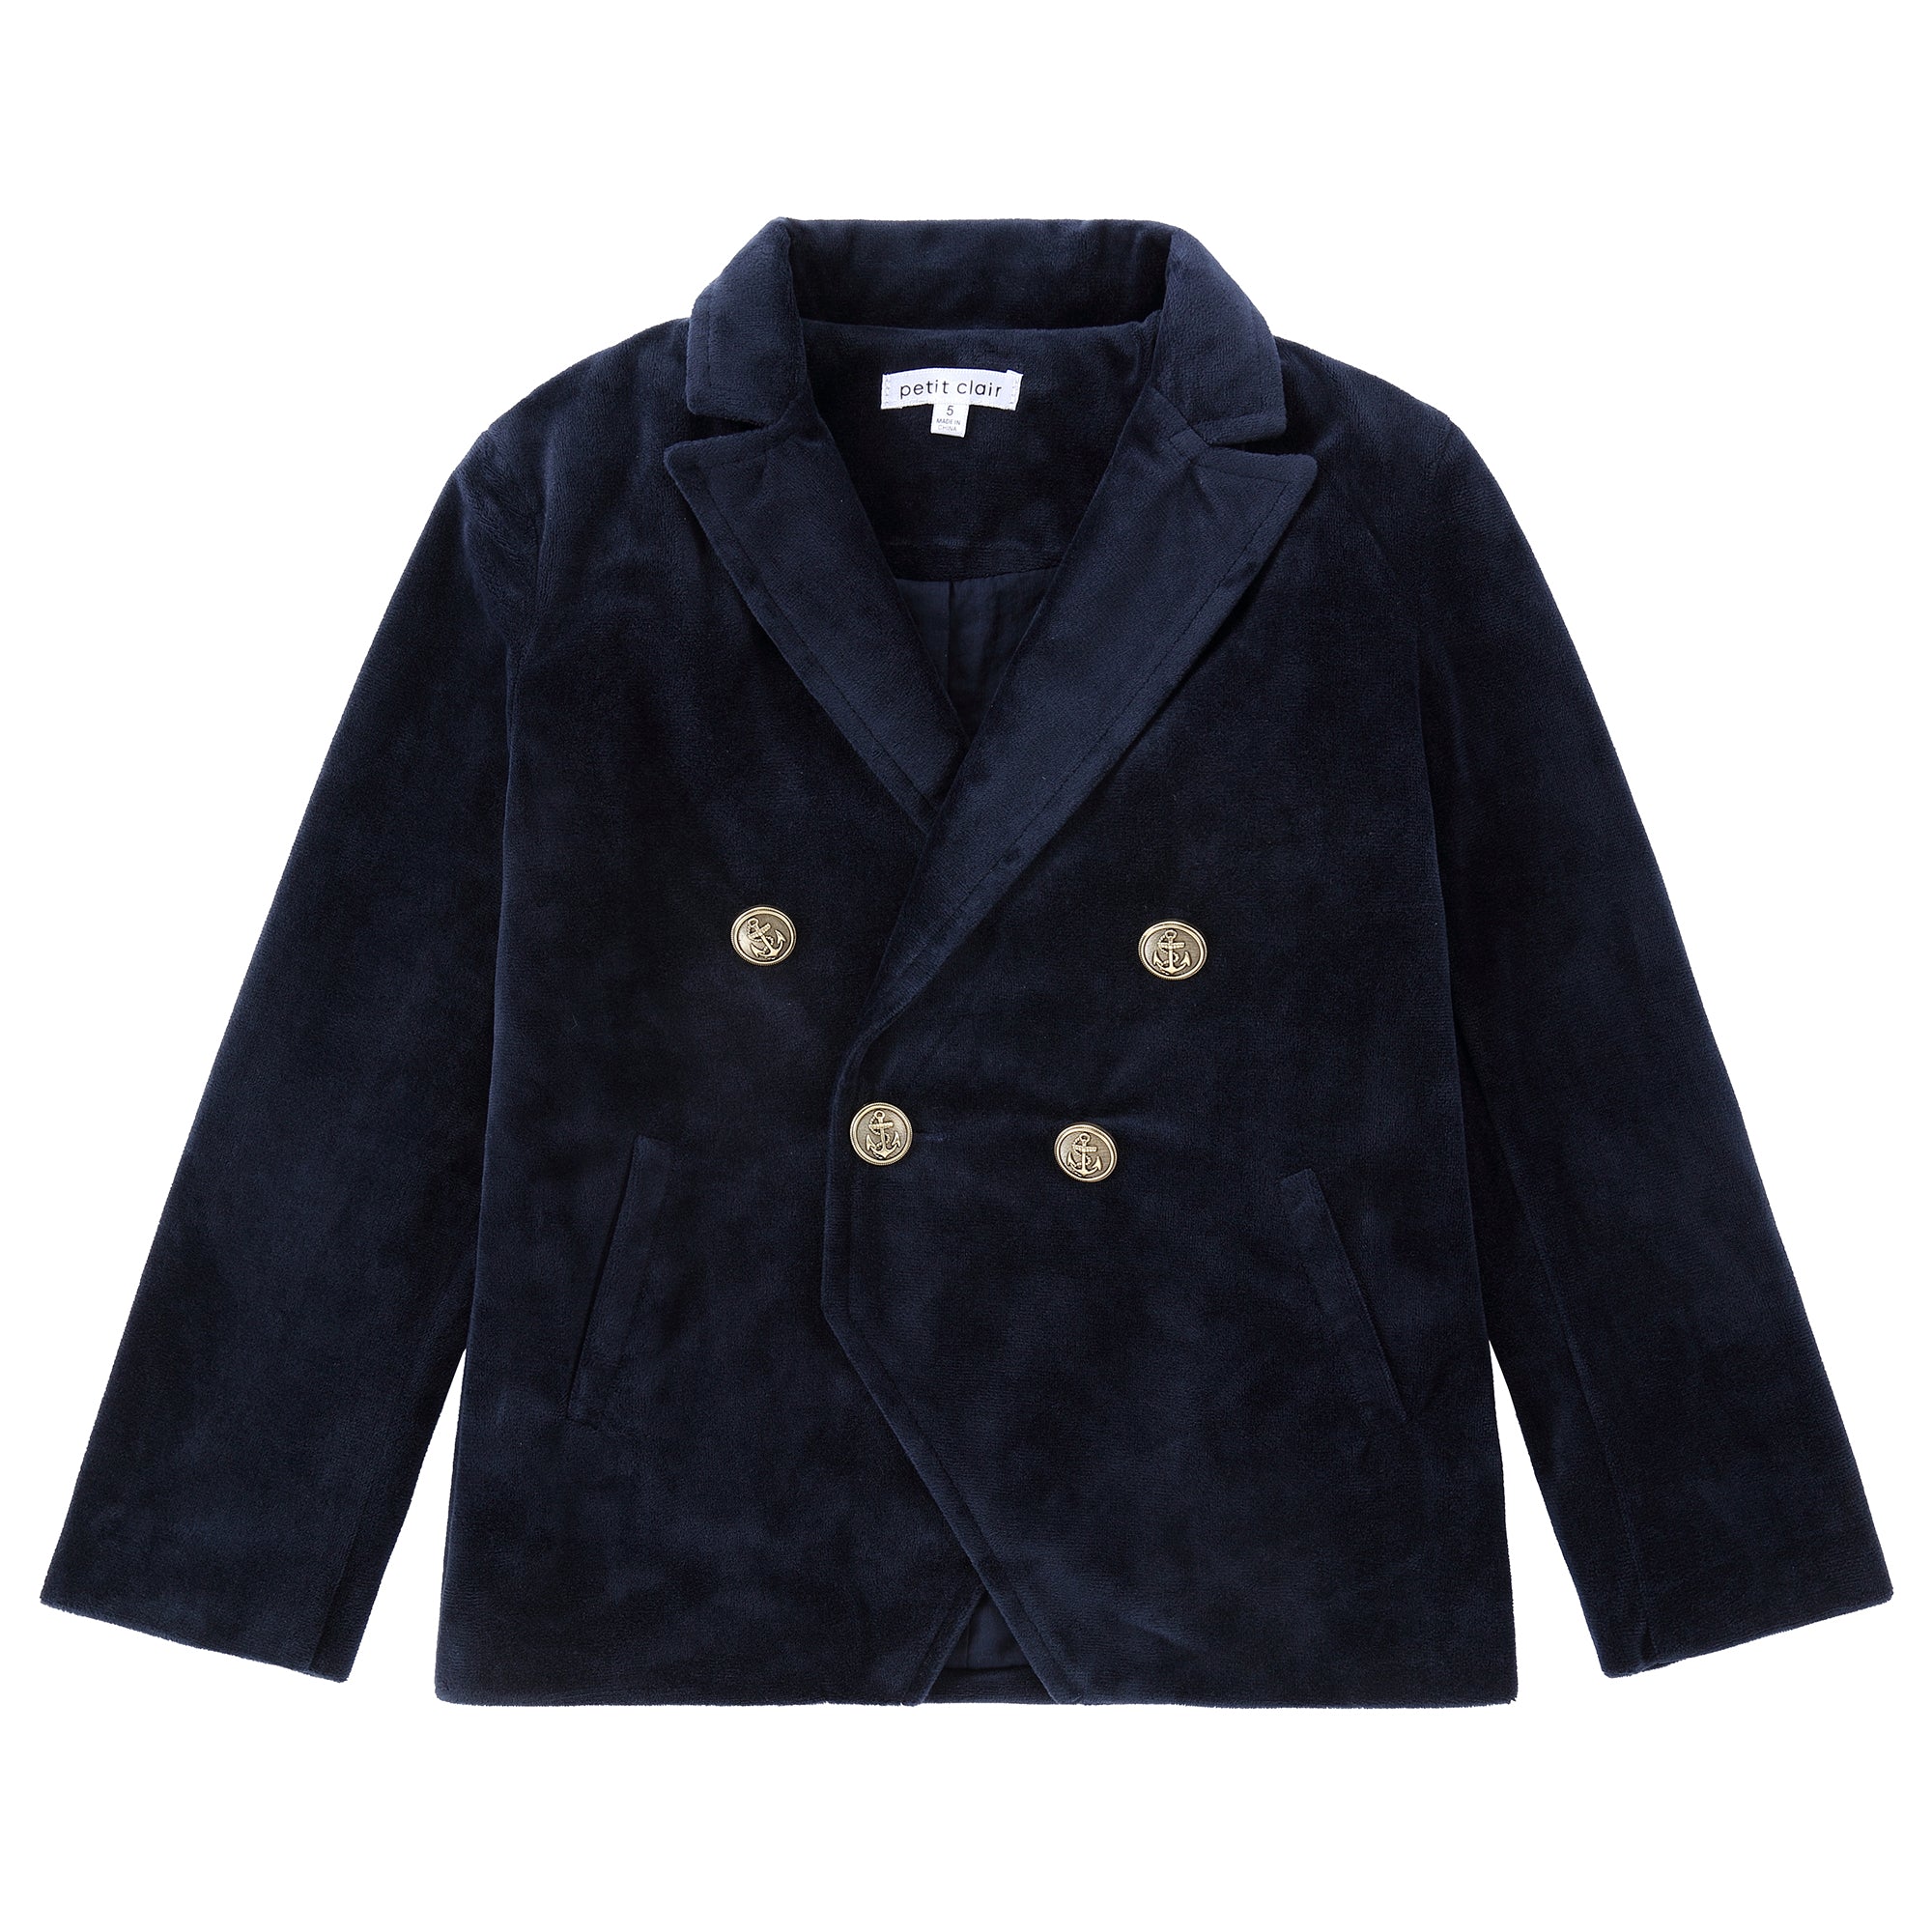 Navy Velvet Double Breasted Blazer With Gold Buttons